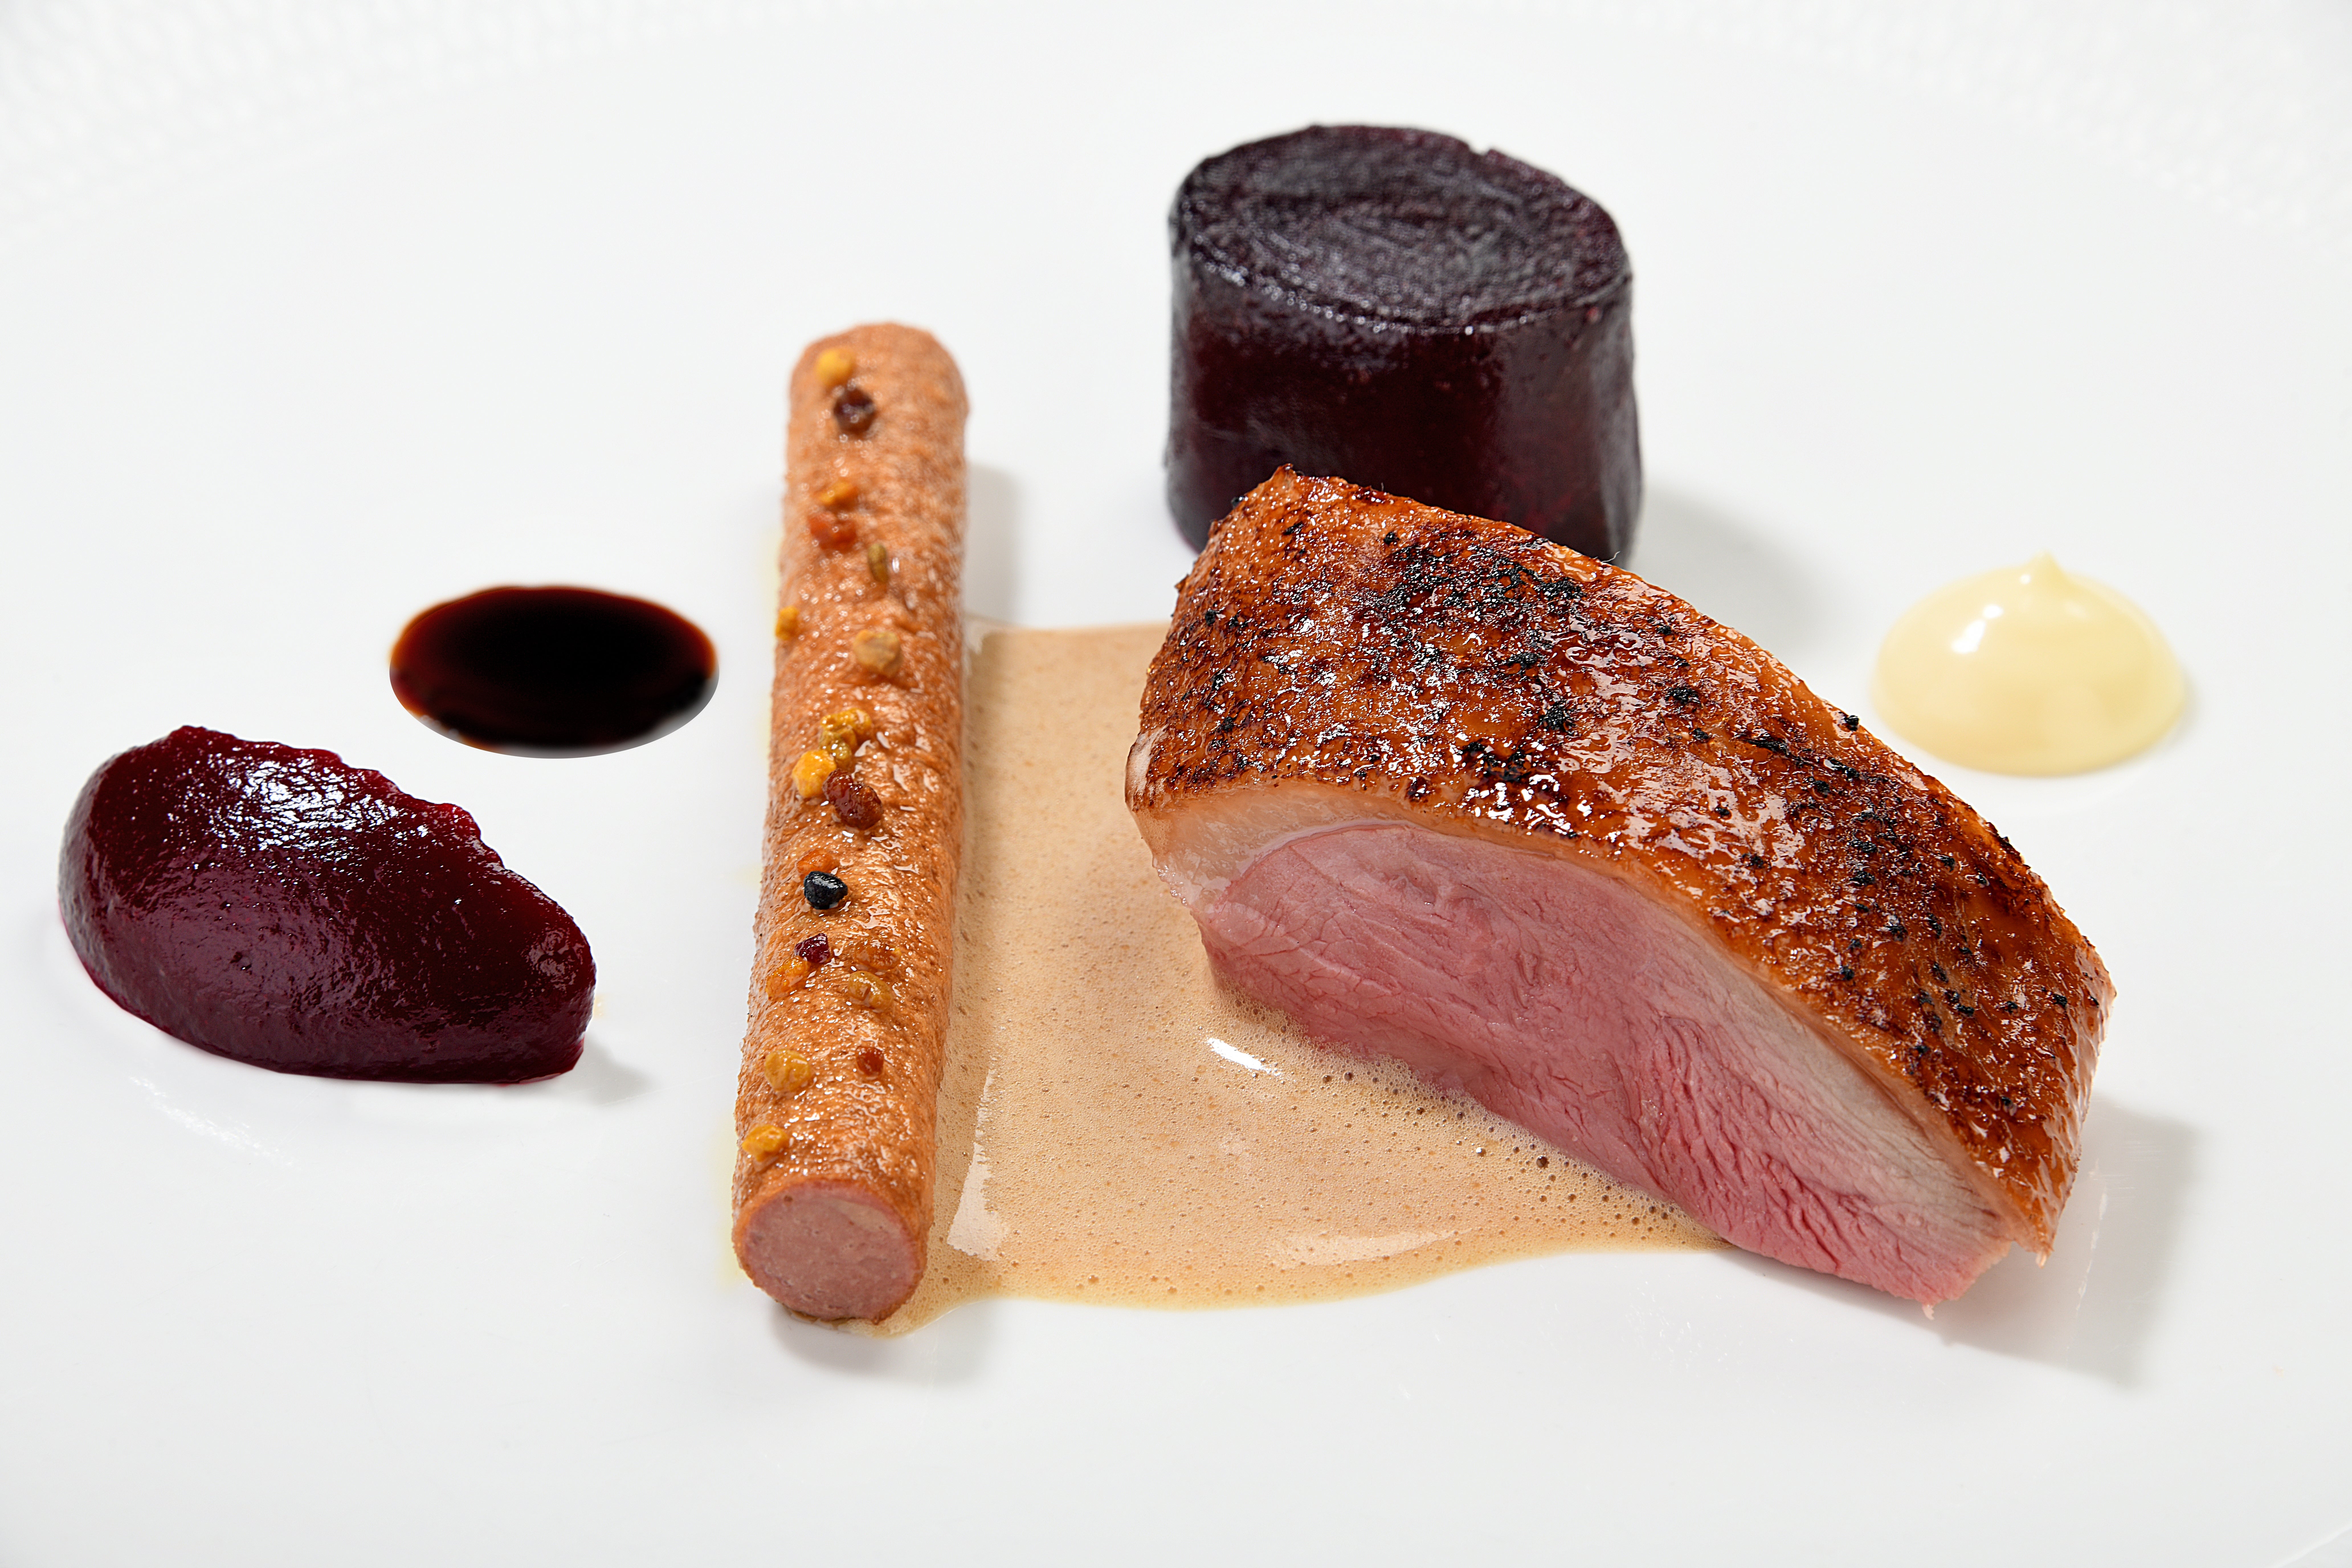 Goodwin-Allen's Yorkshire duck is served with heirloom beetroot, aged balsamic and bee pollen